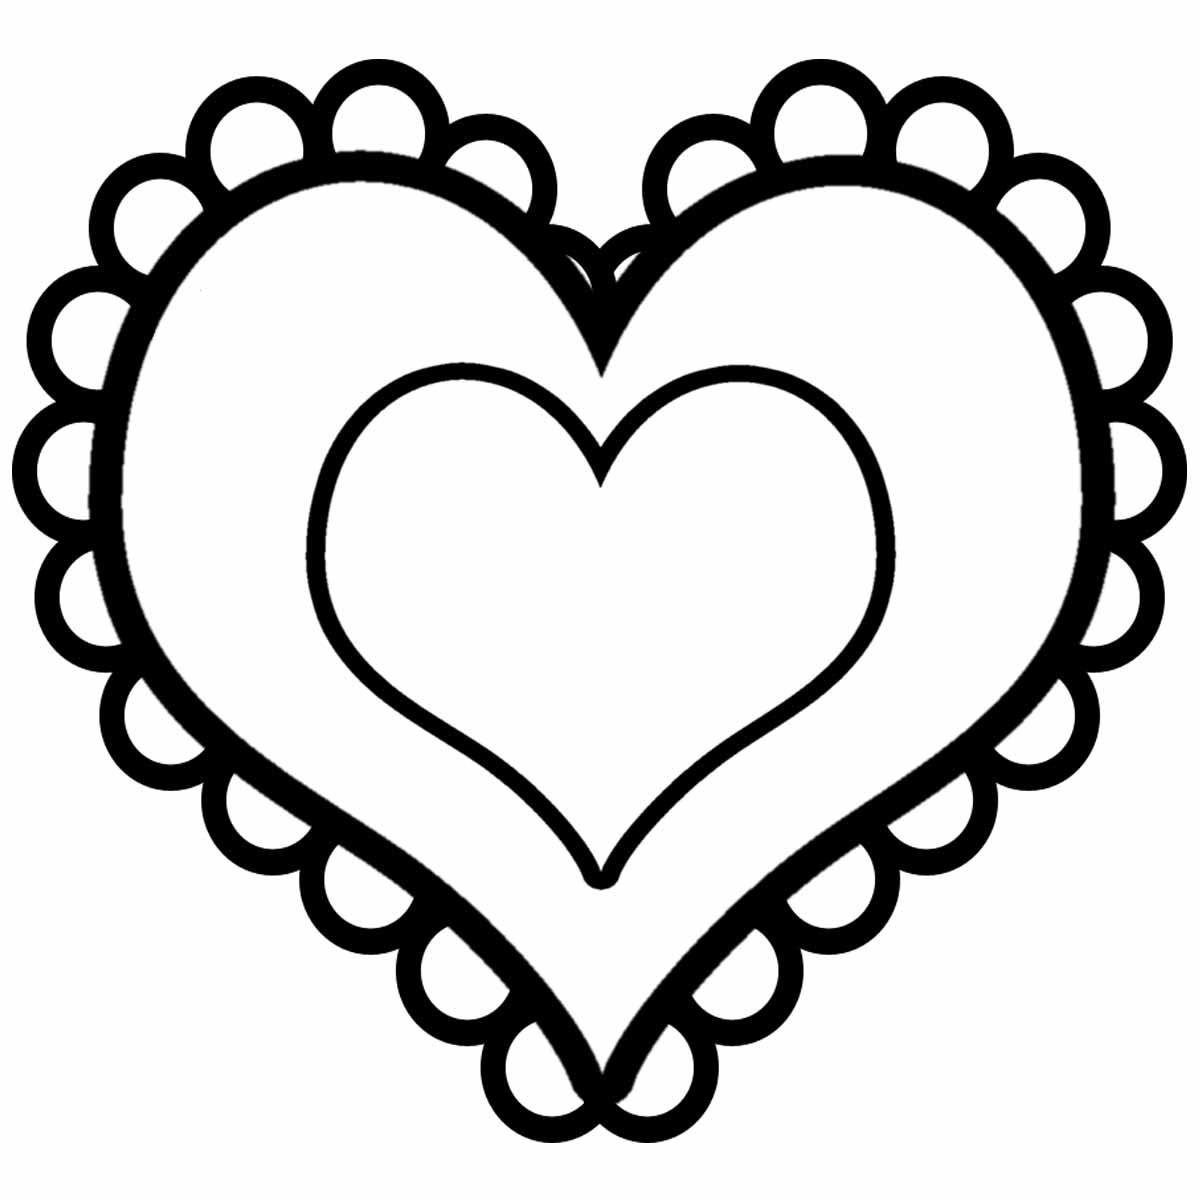 Hearts Clip Art Banner | Clipart library - Free Clipart Images